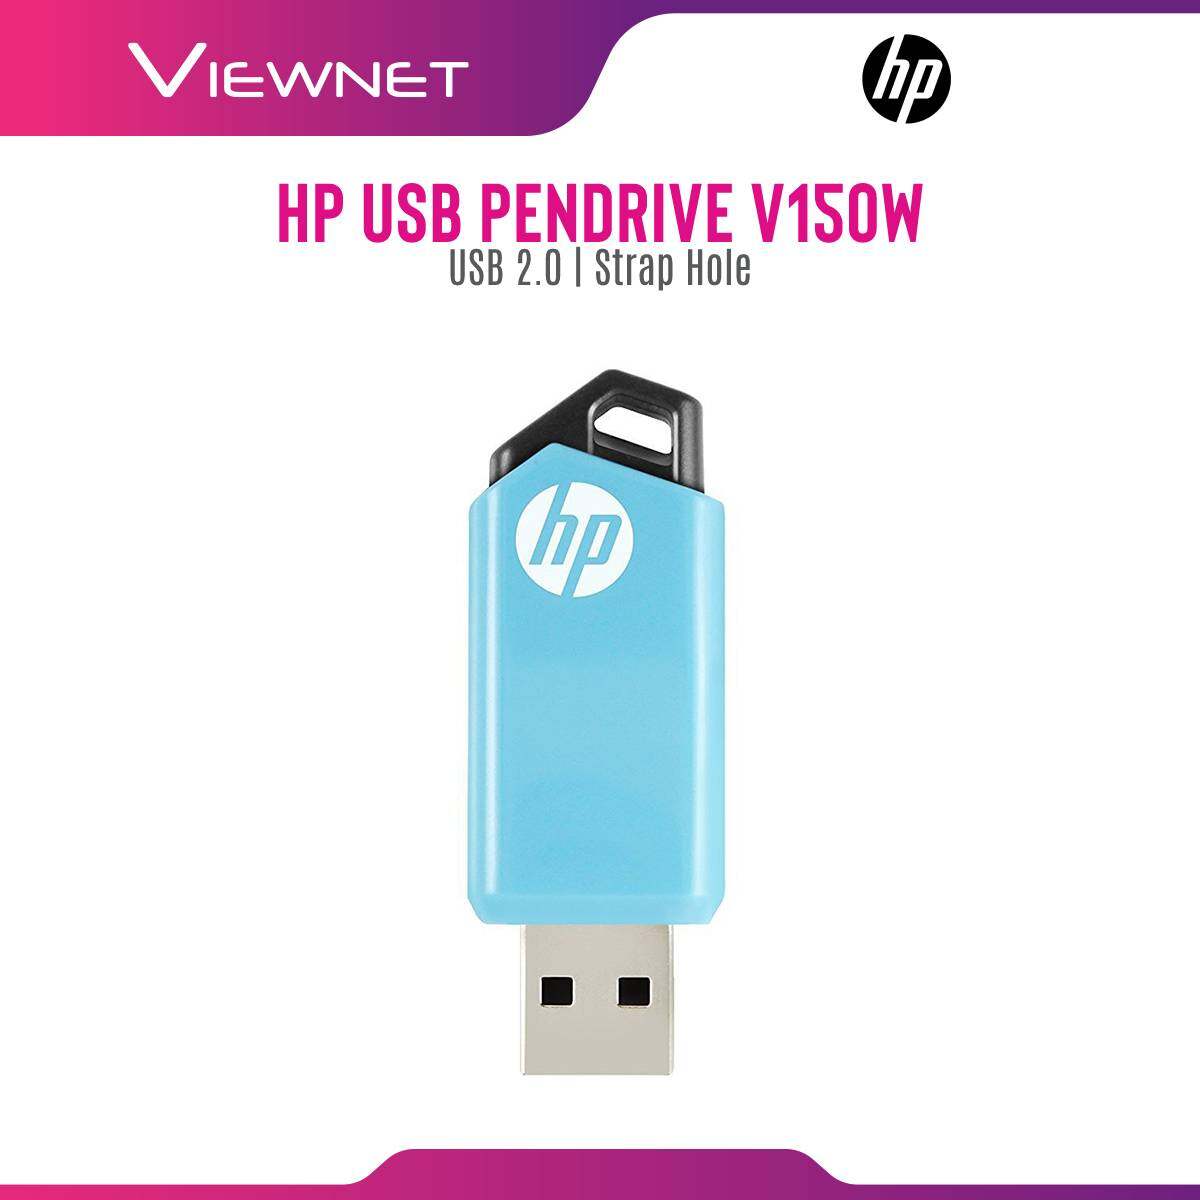 HP USB Pendrive V150W 64GB Blue with USB 2.0 Connection, Slide To Open, Strap Hole (HPFD150W-64)